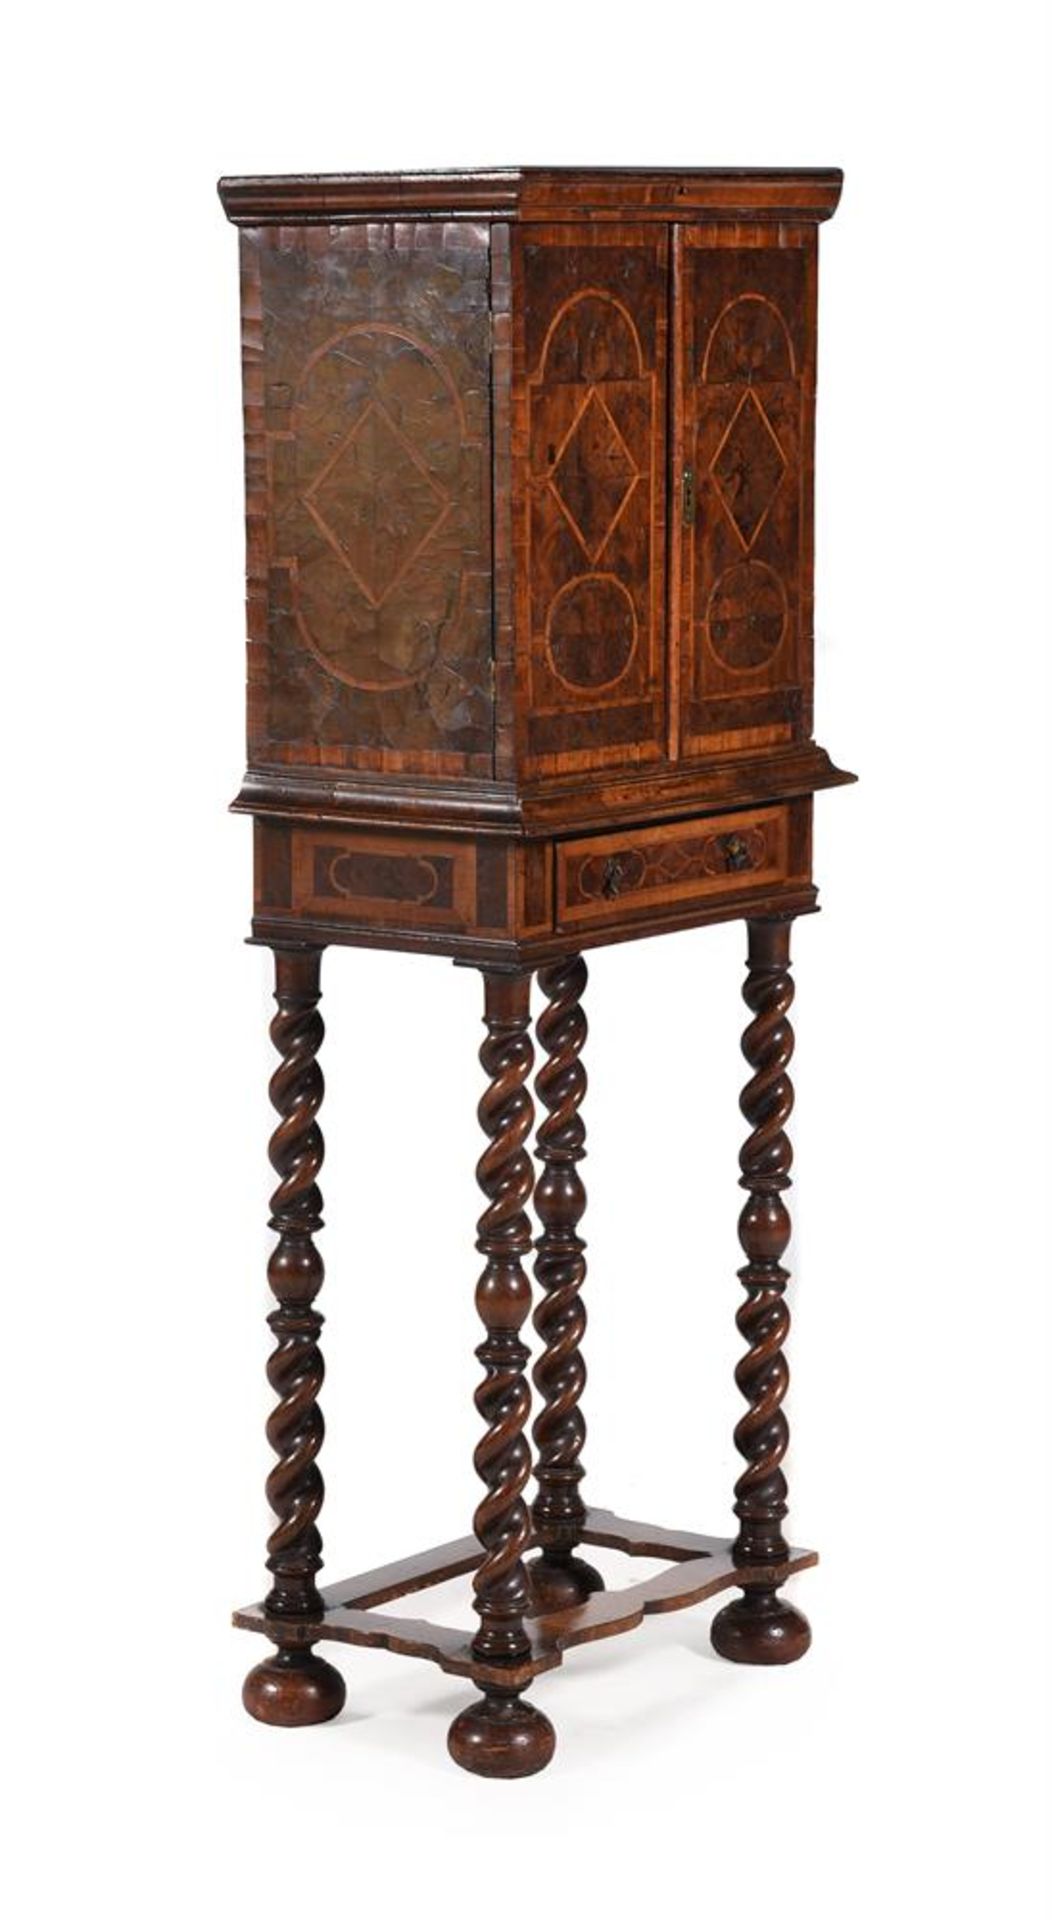 A CHARLES II YEW OYSTER VENEERED AND HOLLY BANDED CABINET - Image 2 of 9